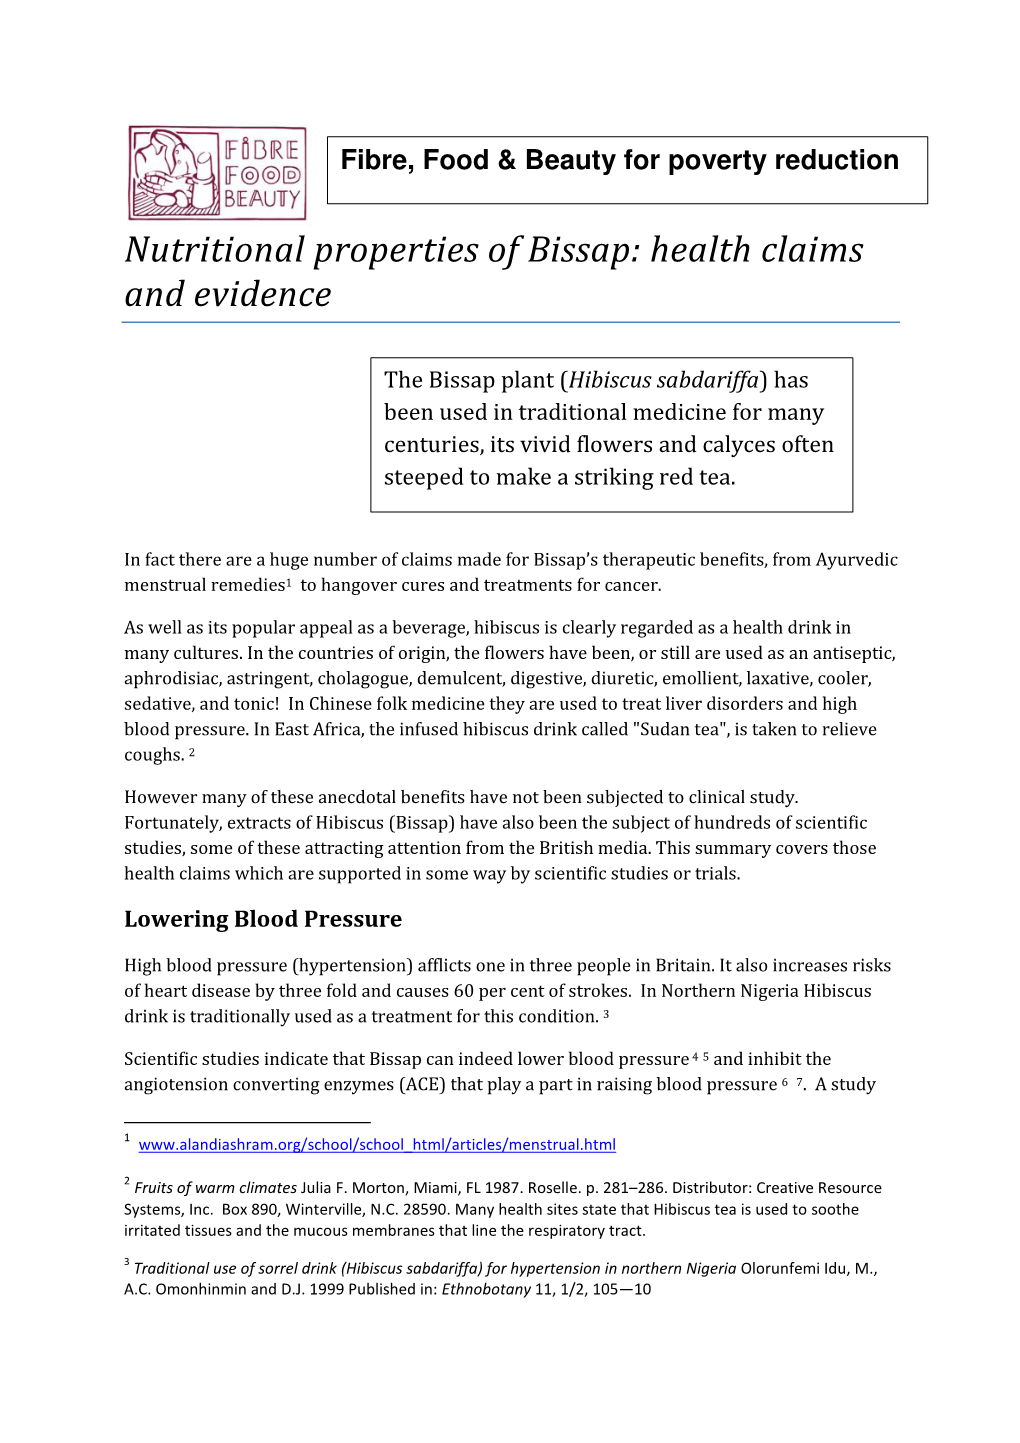 Nutritional Properties of Bissap: Health Claims and Evidence